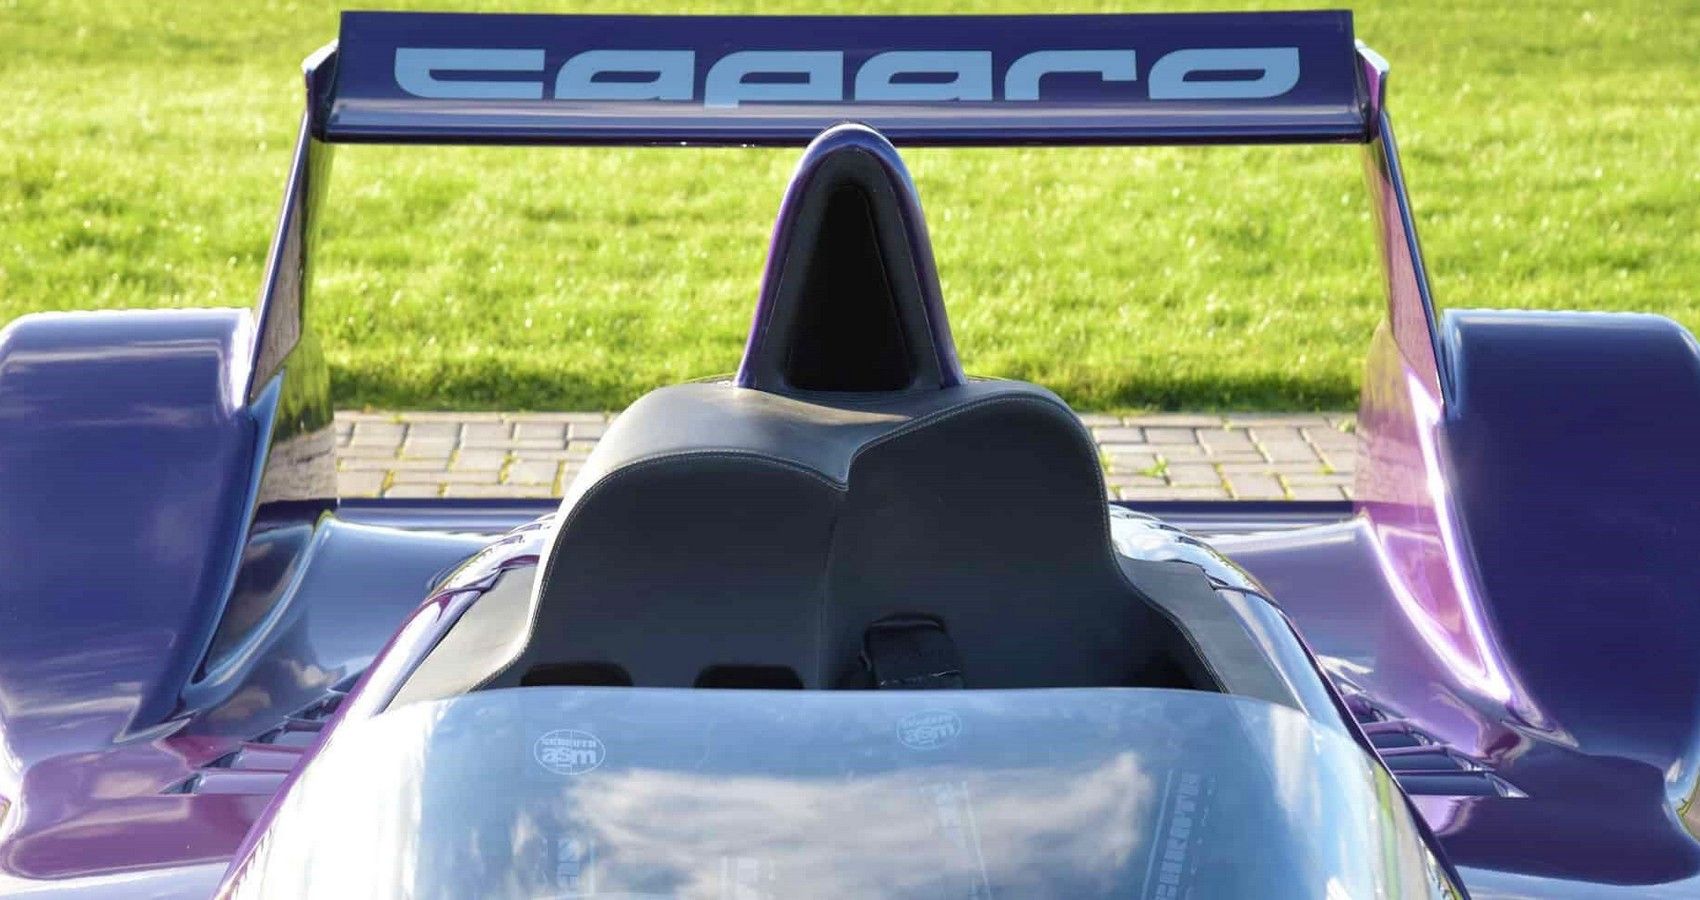 Caparo Cockpit - Head on View, off-set two seater